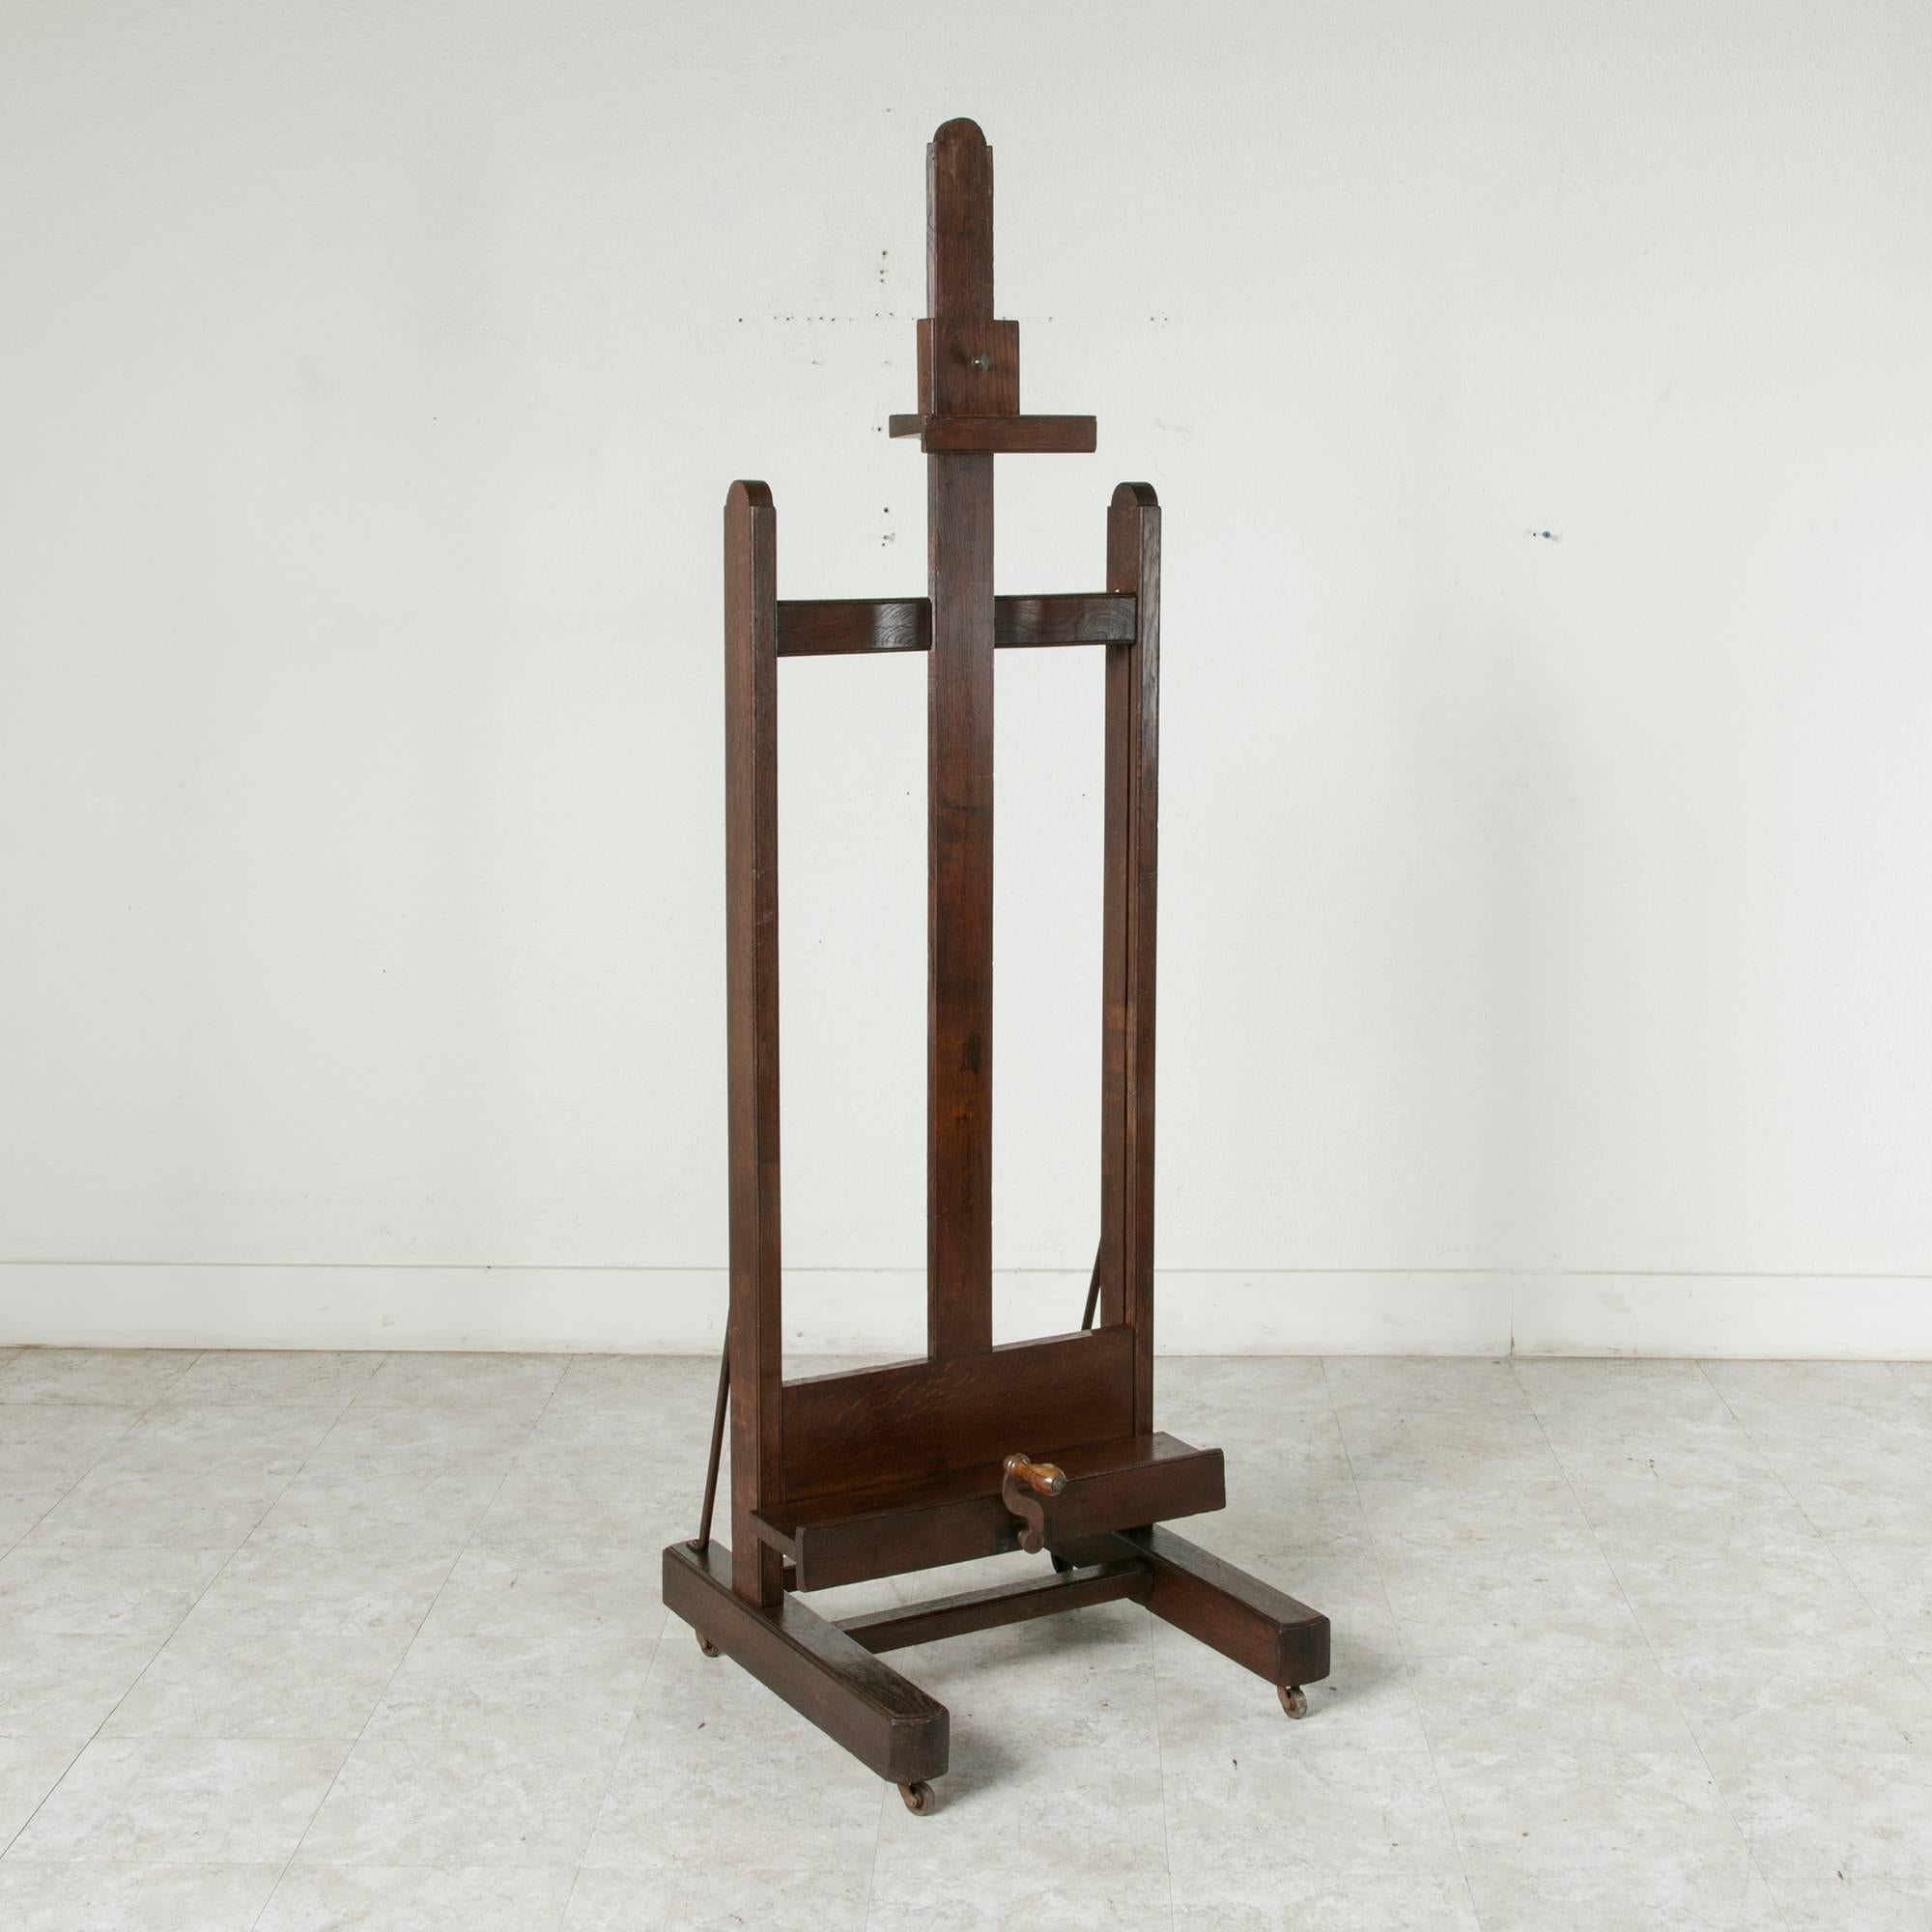 This grand late 19th century oak artist's easel has its original functioning crank mechanism to adjust the tray height. With a fantastic adjustable height of 69 inches to 105 inches, this sturdy easel can handle impressively large canvases or make